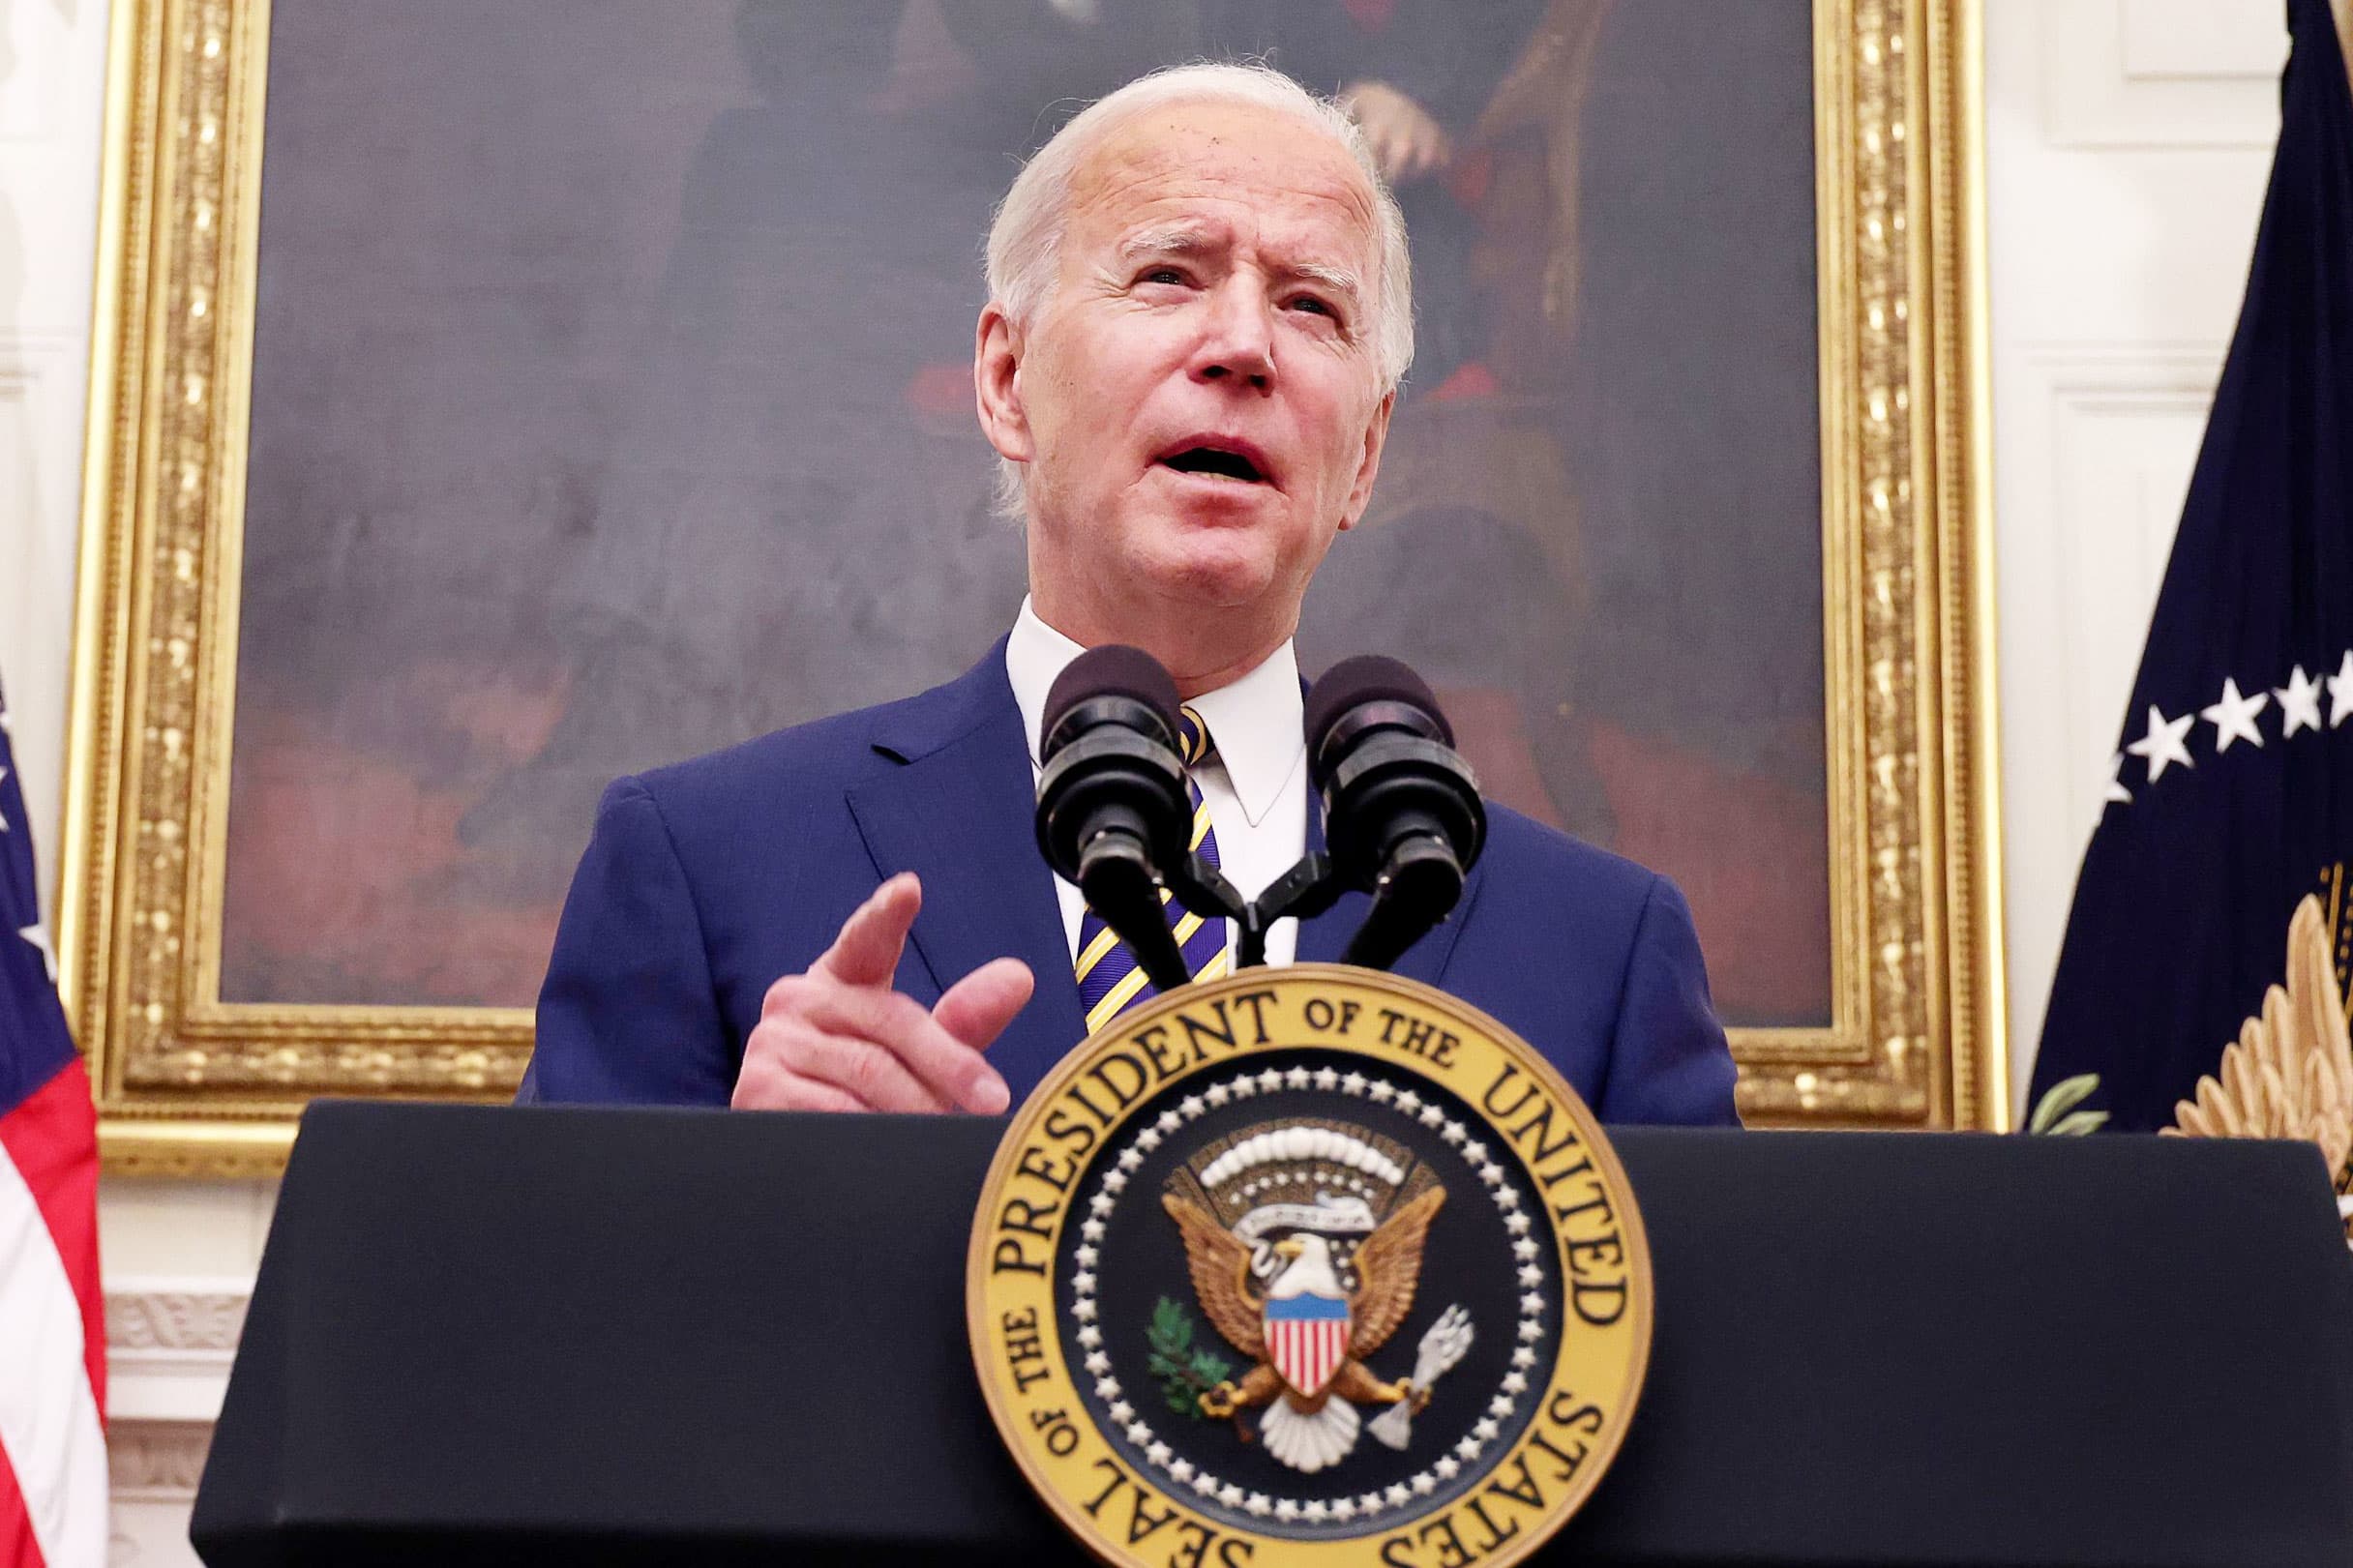 Biden says nothing can change the trajectory of the Covid pandemic in the coming months